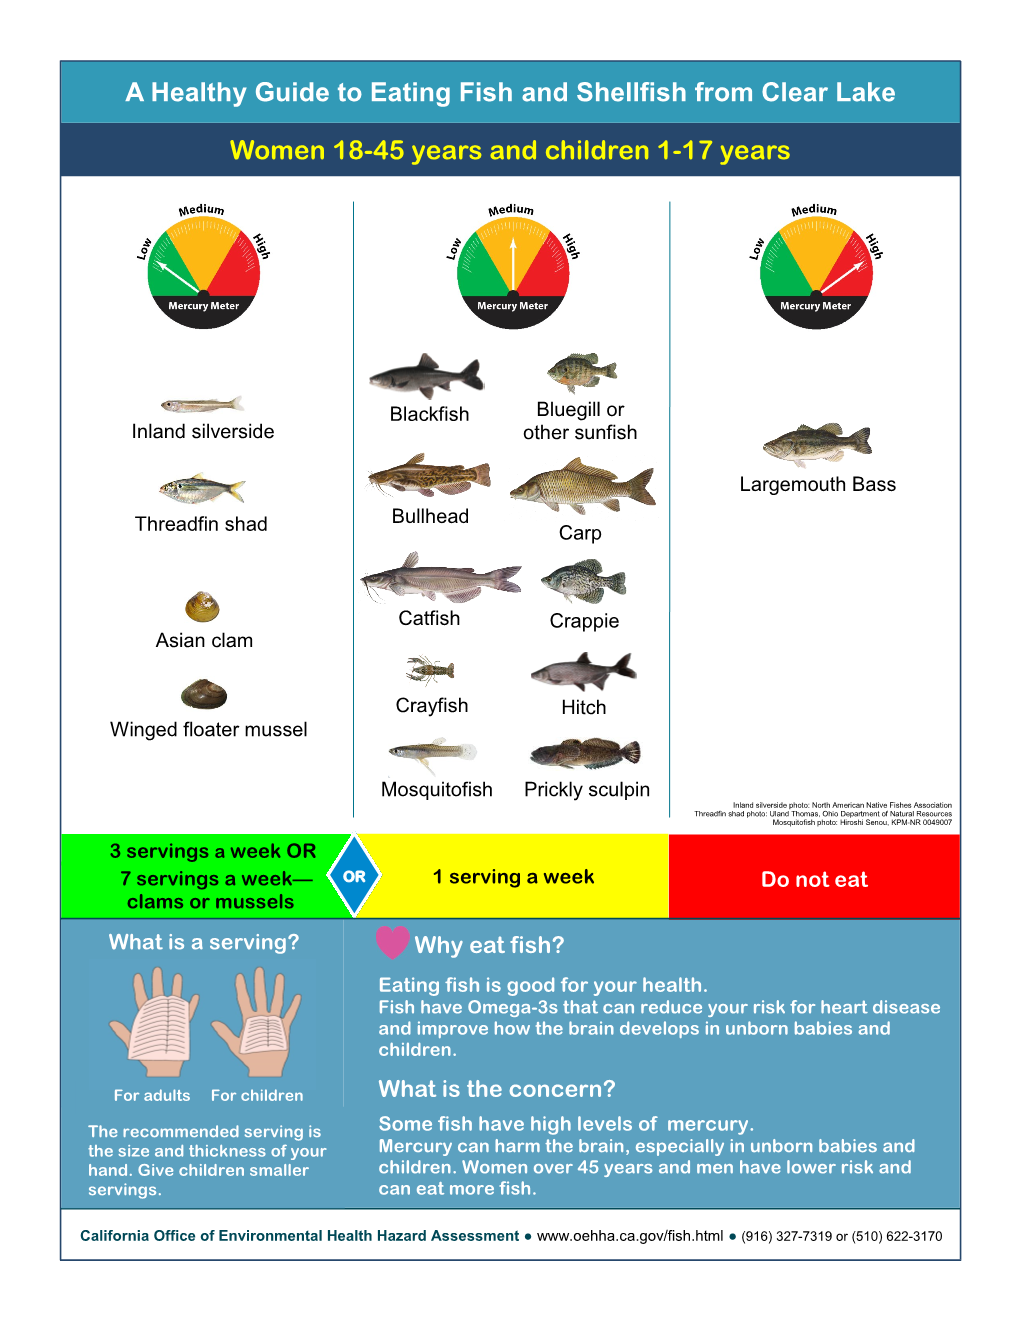 A Healthy Guide to Eating Fish from Clear Lake, Lake County, California